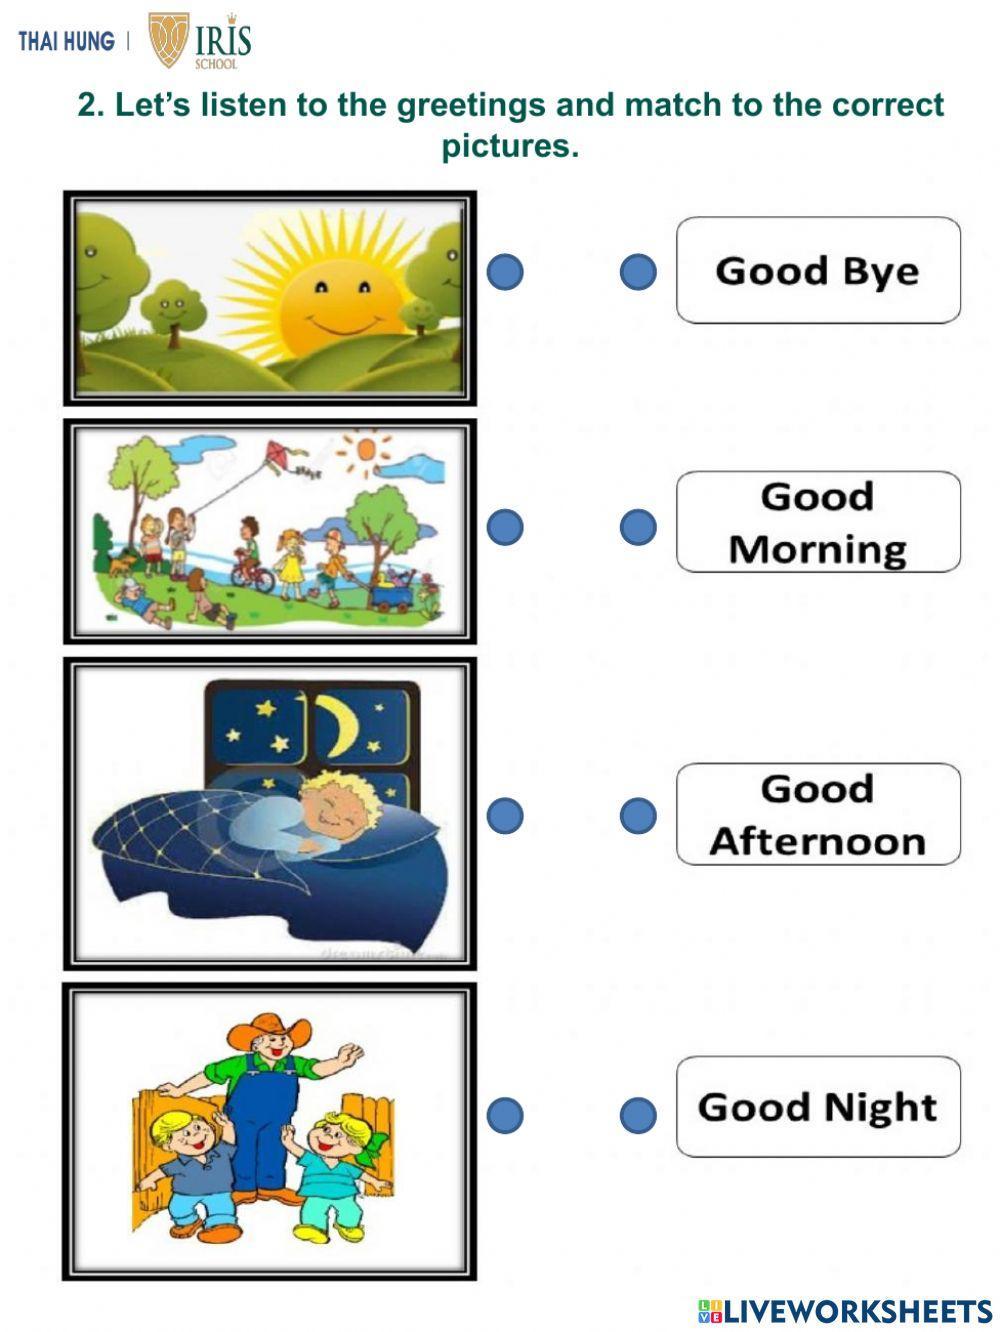 Worksheet about Greetings for Kids